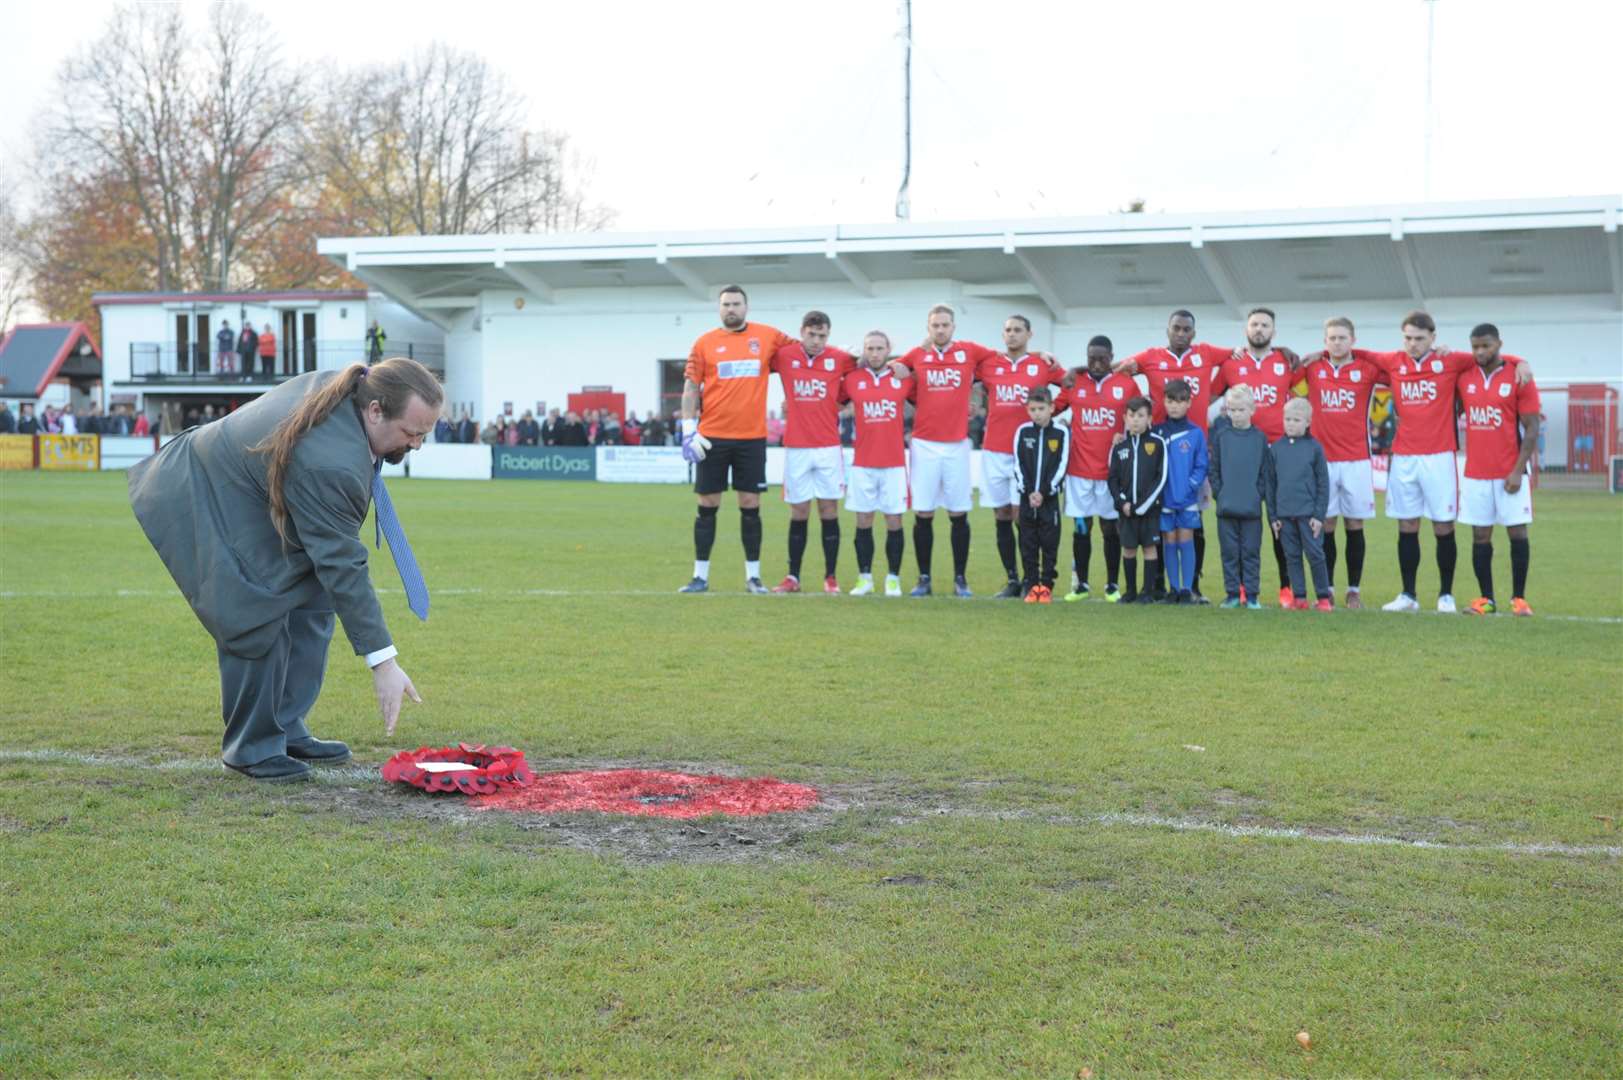 Vince Maple (Lab) laid down the wreath on the centre spot before the match.